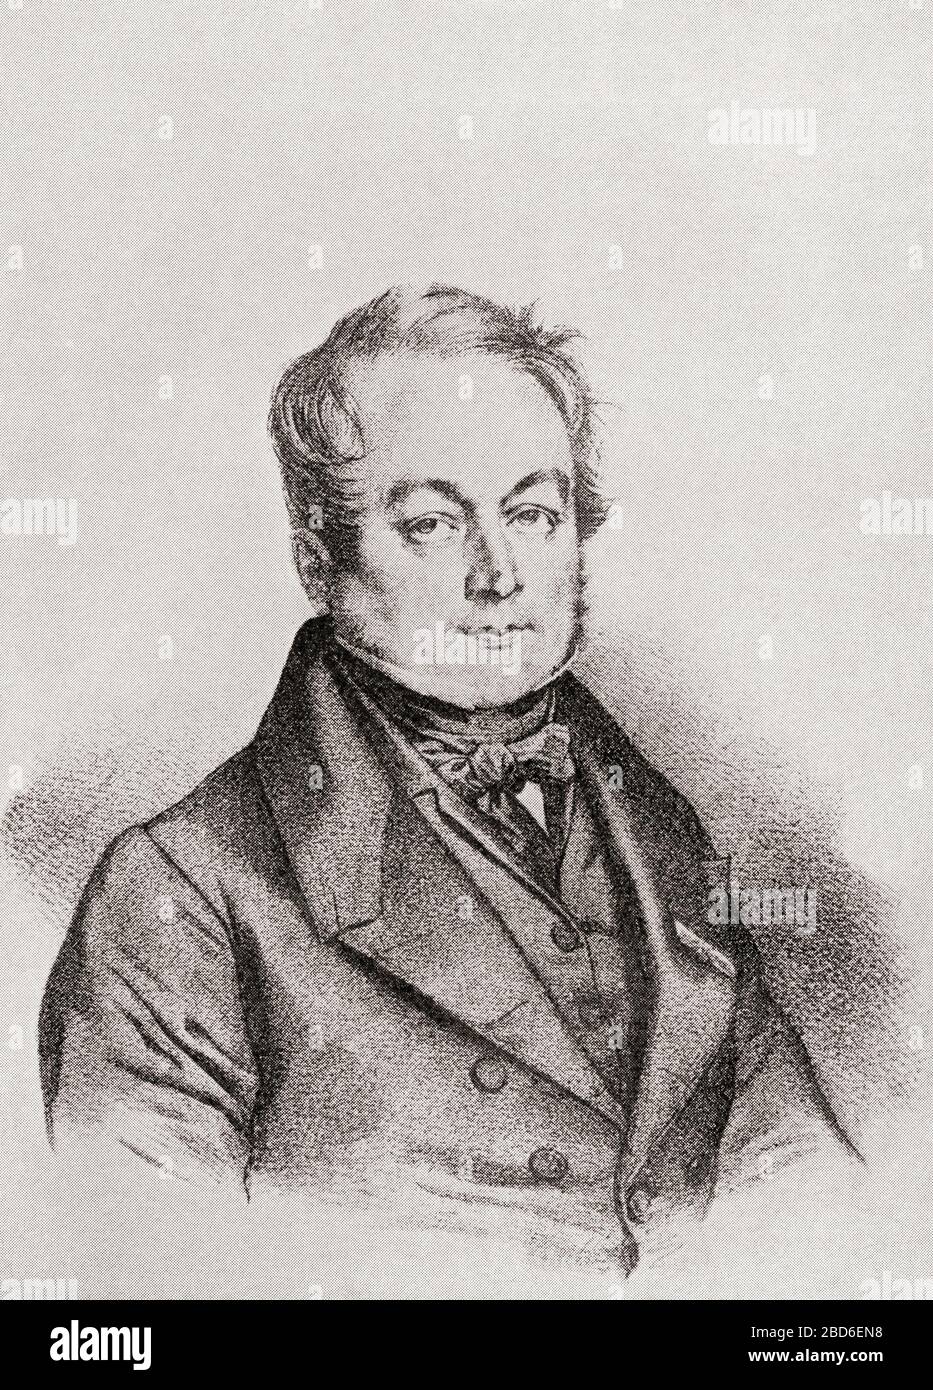 François Magendie, 1783 – 1855. French physiologist, and pioneer of experimental physiology.  From Selected Readings in the History of Physiology, published 1930. Stock Photo